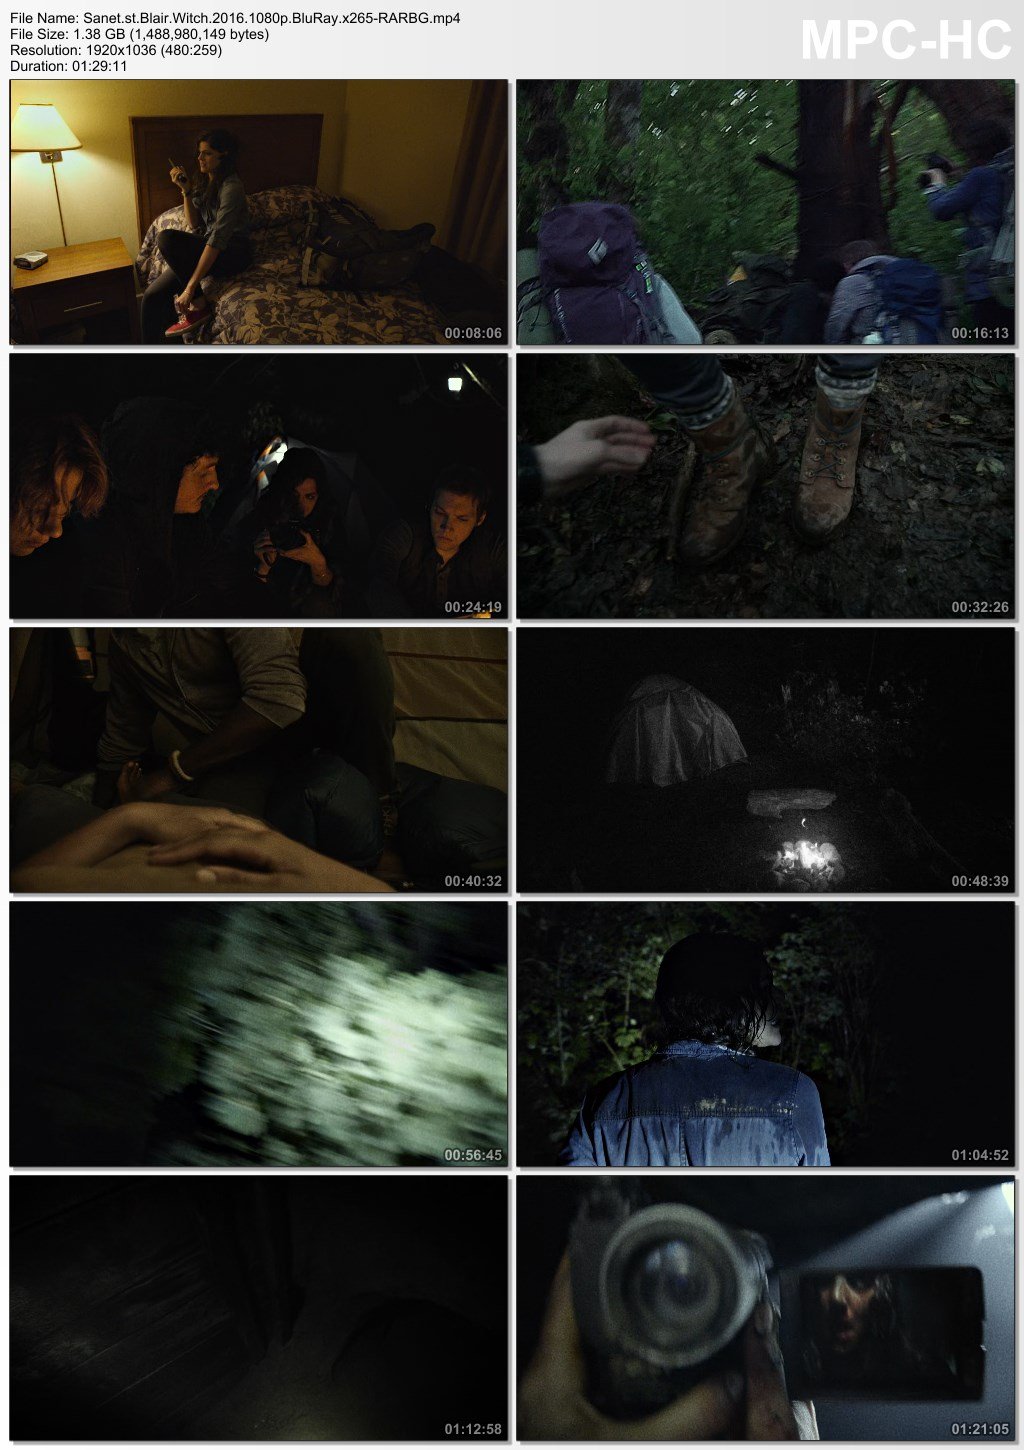 blair witch 2016 free download